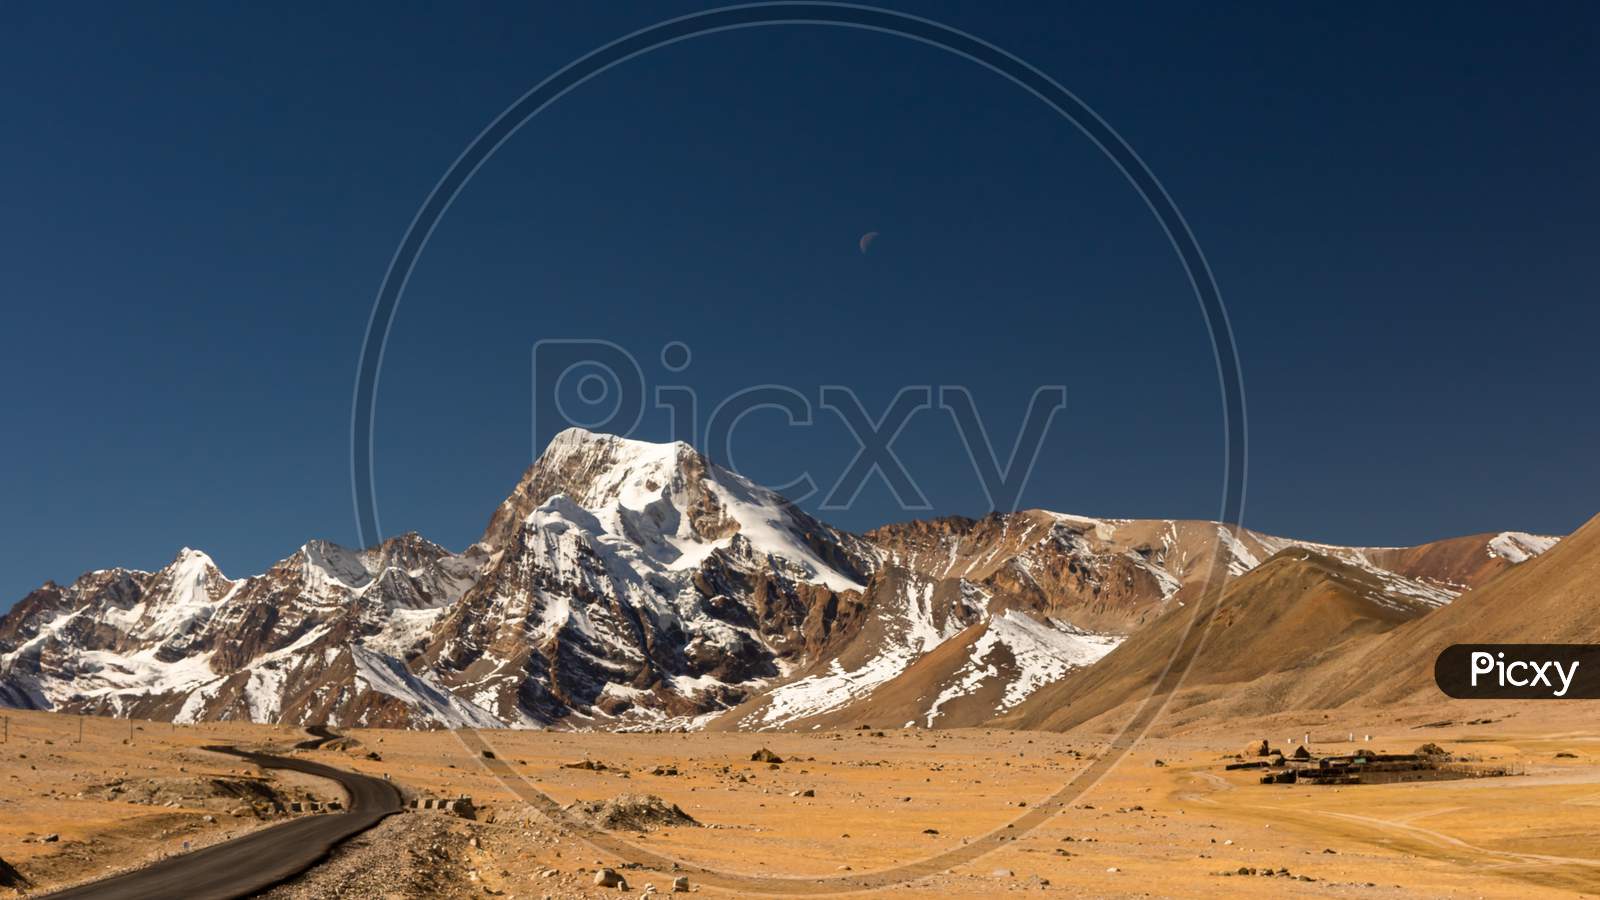 A long lonely road with curves on the tibetan plateau with snow clad mountainsA long lonely road with curves on the tibetan plateau with snow clad mountains